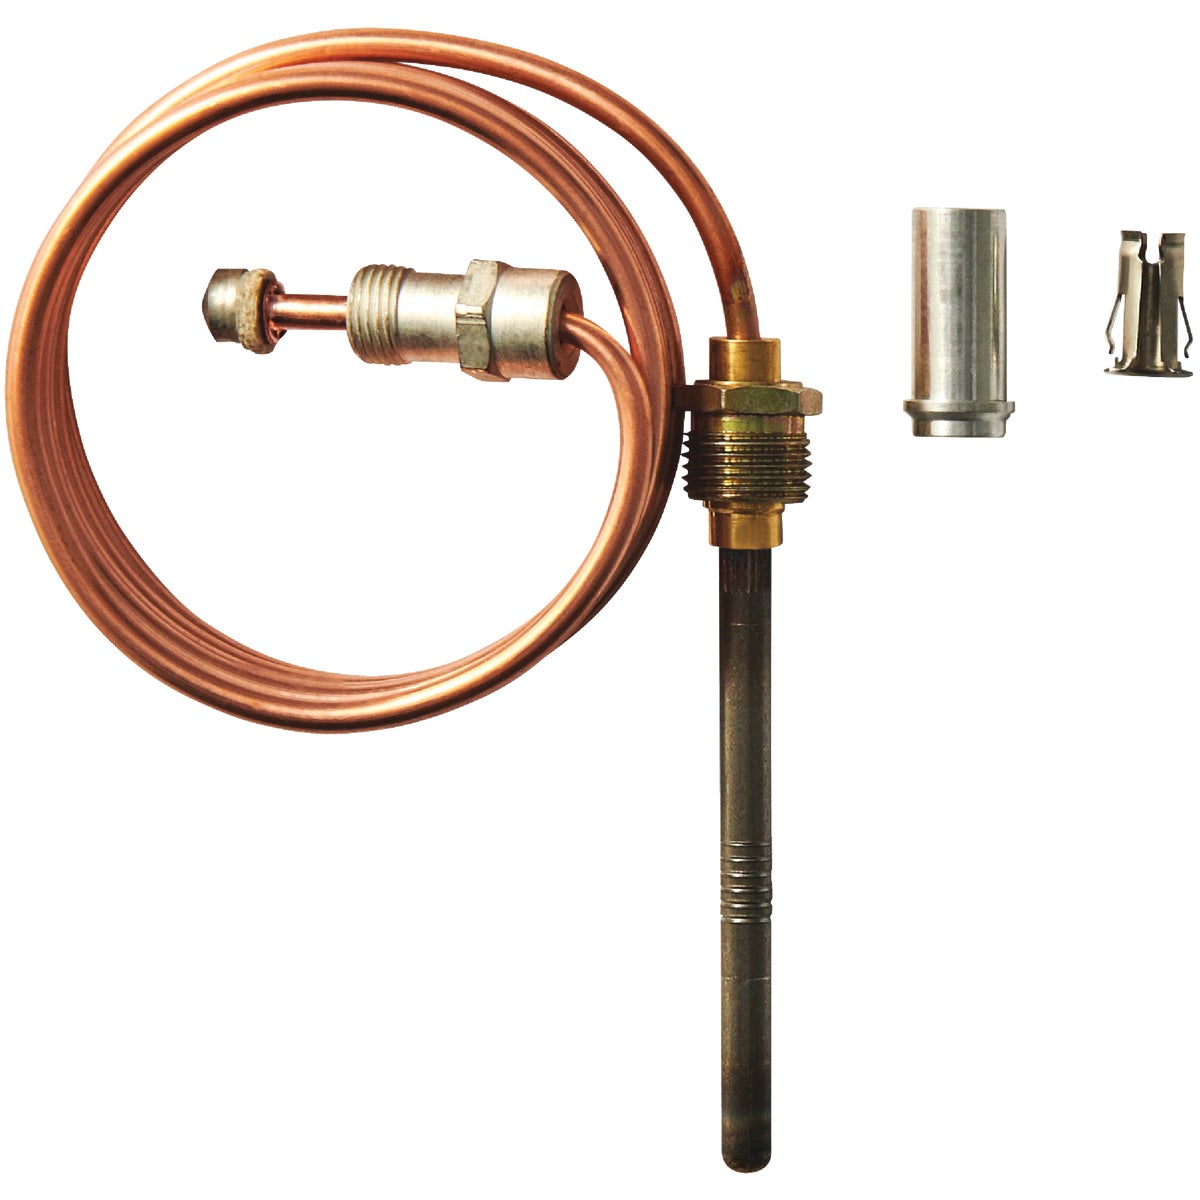 Resideo 36 In. 30mV Universal Thermocouple